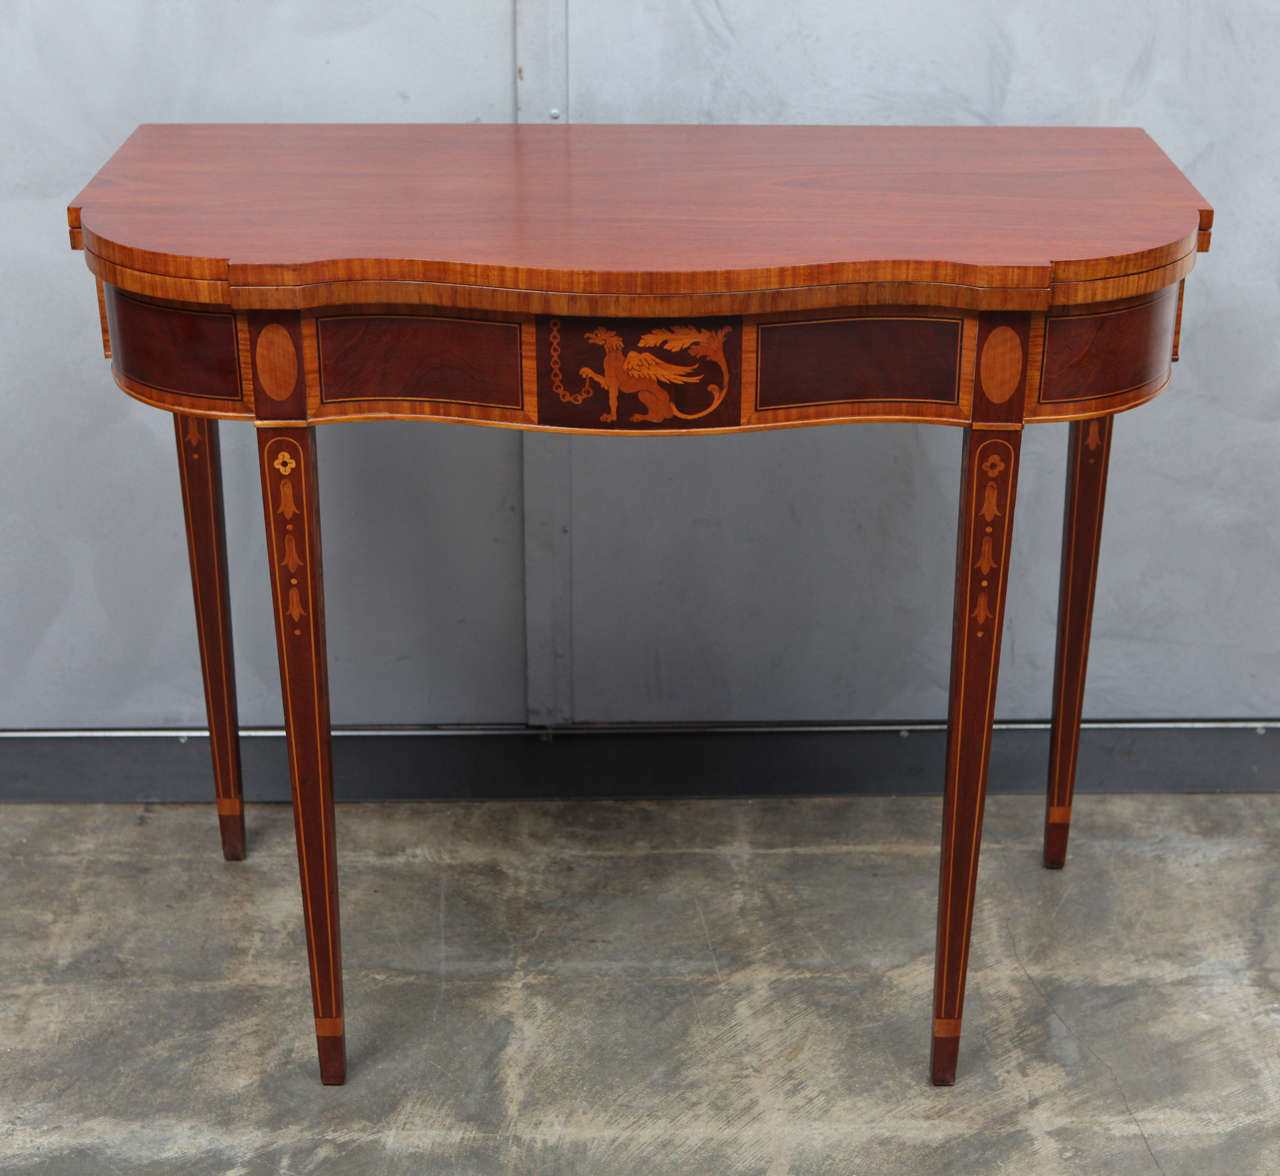 This inlaid mahogany game table has some great examples of federal style motifs and techniques including a griffinin inlaid marquetry and parquetry banding and details. The four tapered legs are beautifully decorated with bell flower details. This